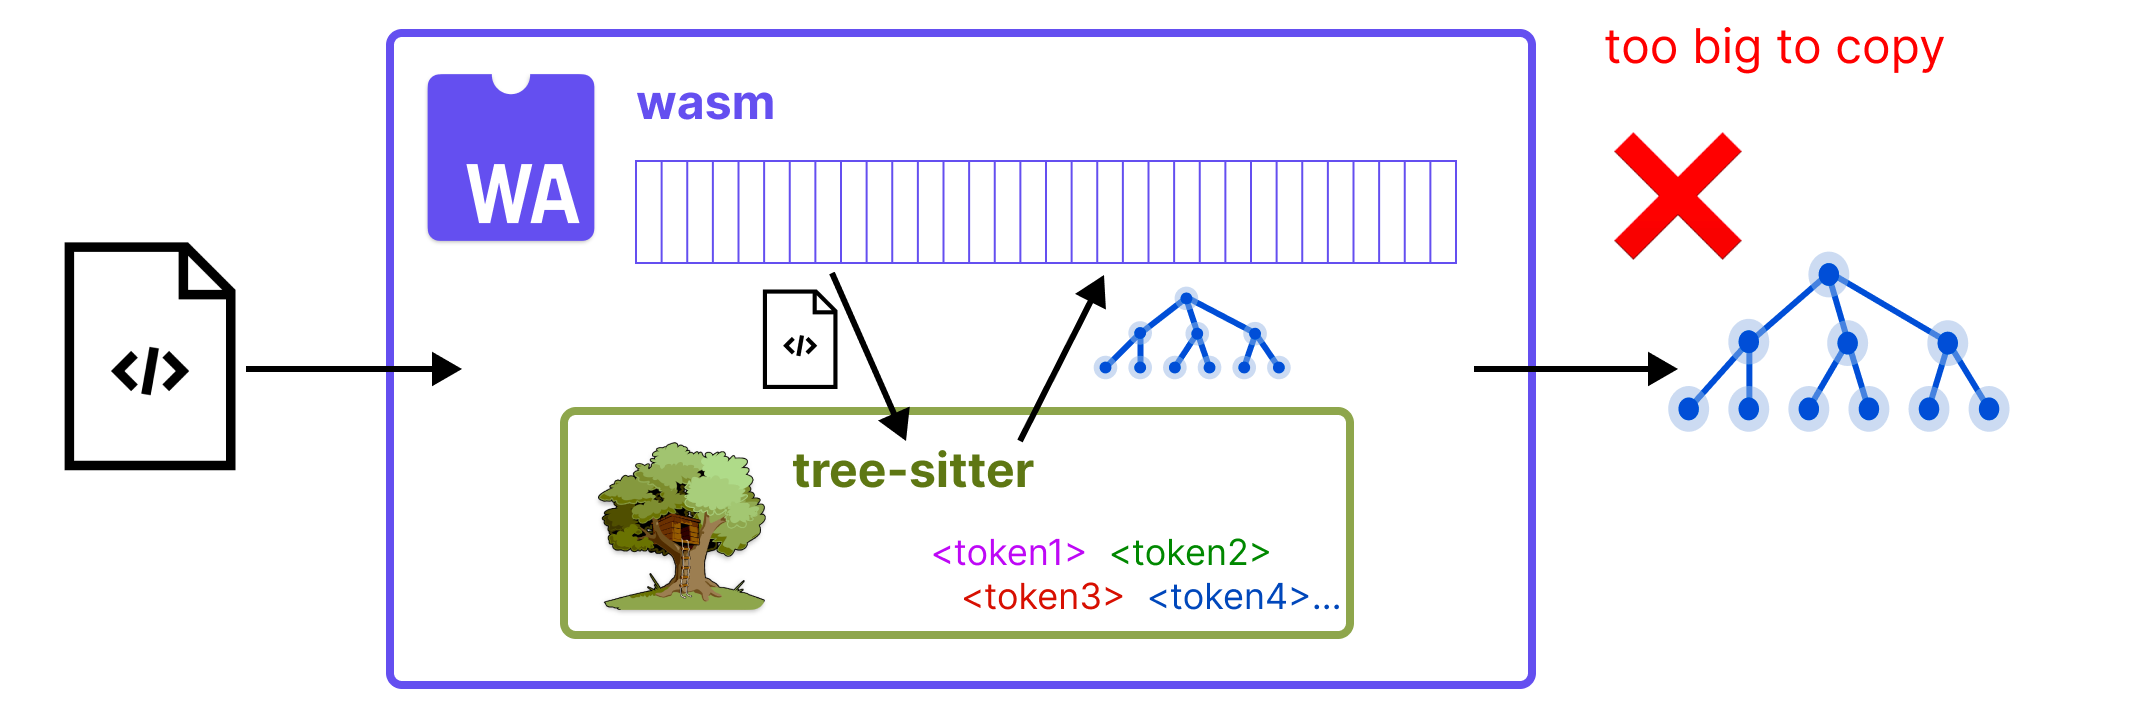 If we simply compiled all of Tree-sitter to wasm, it would be very expensive to copy the syntax tree out of the wasm memory.